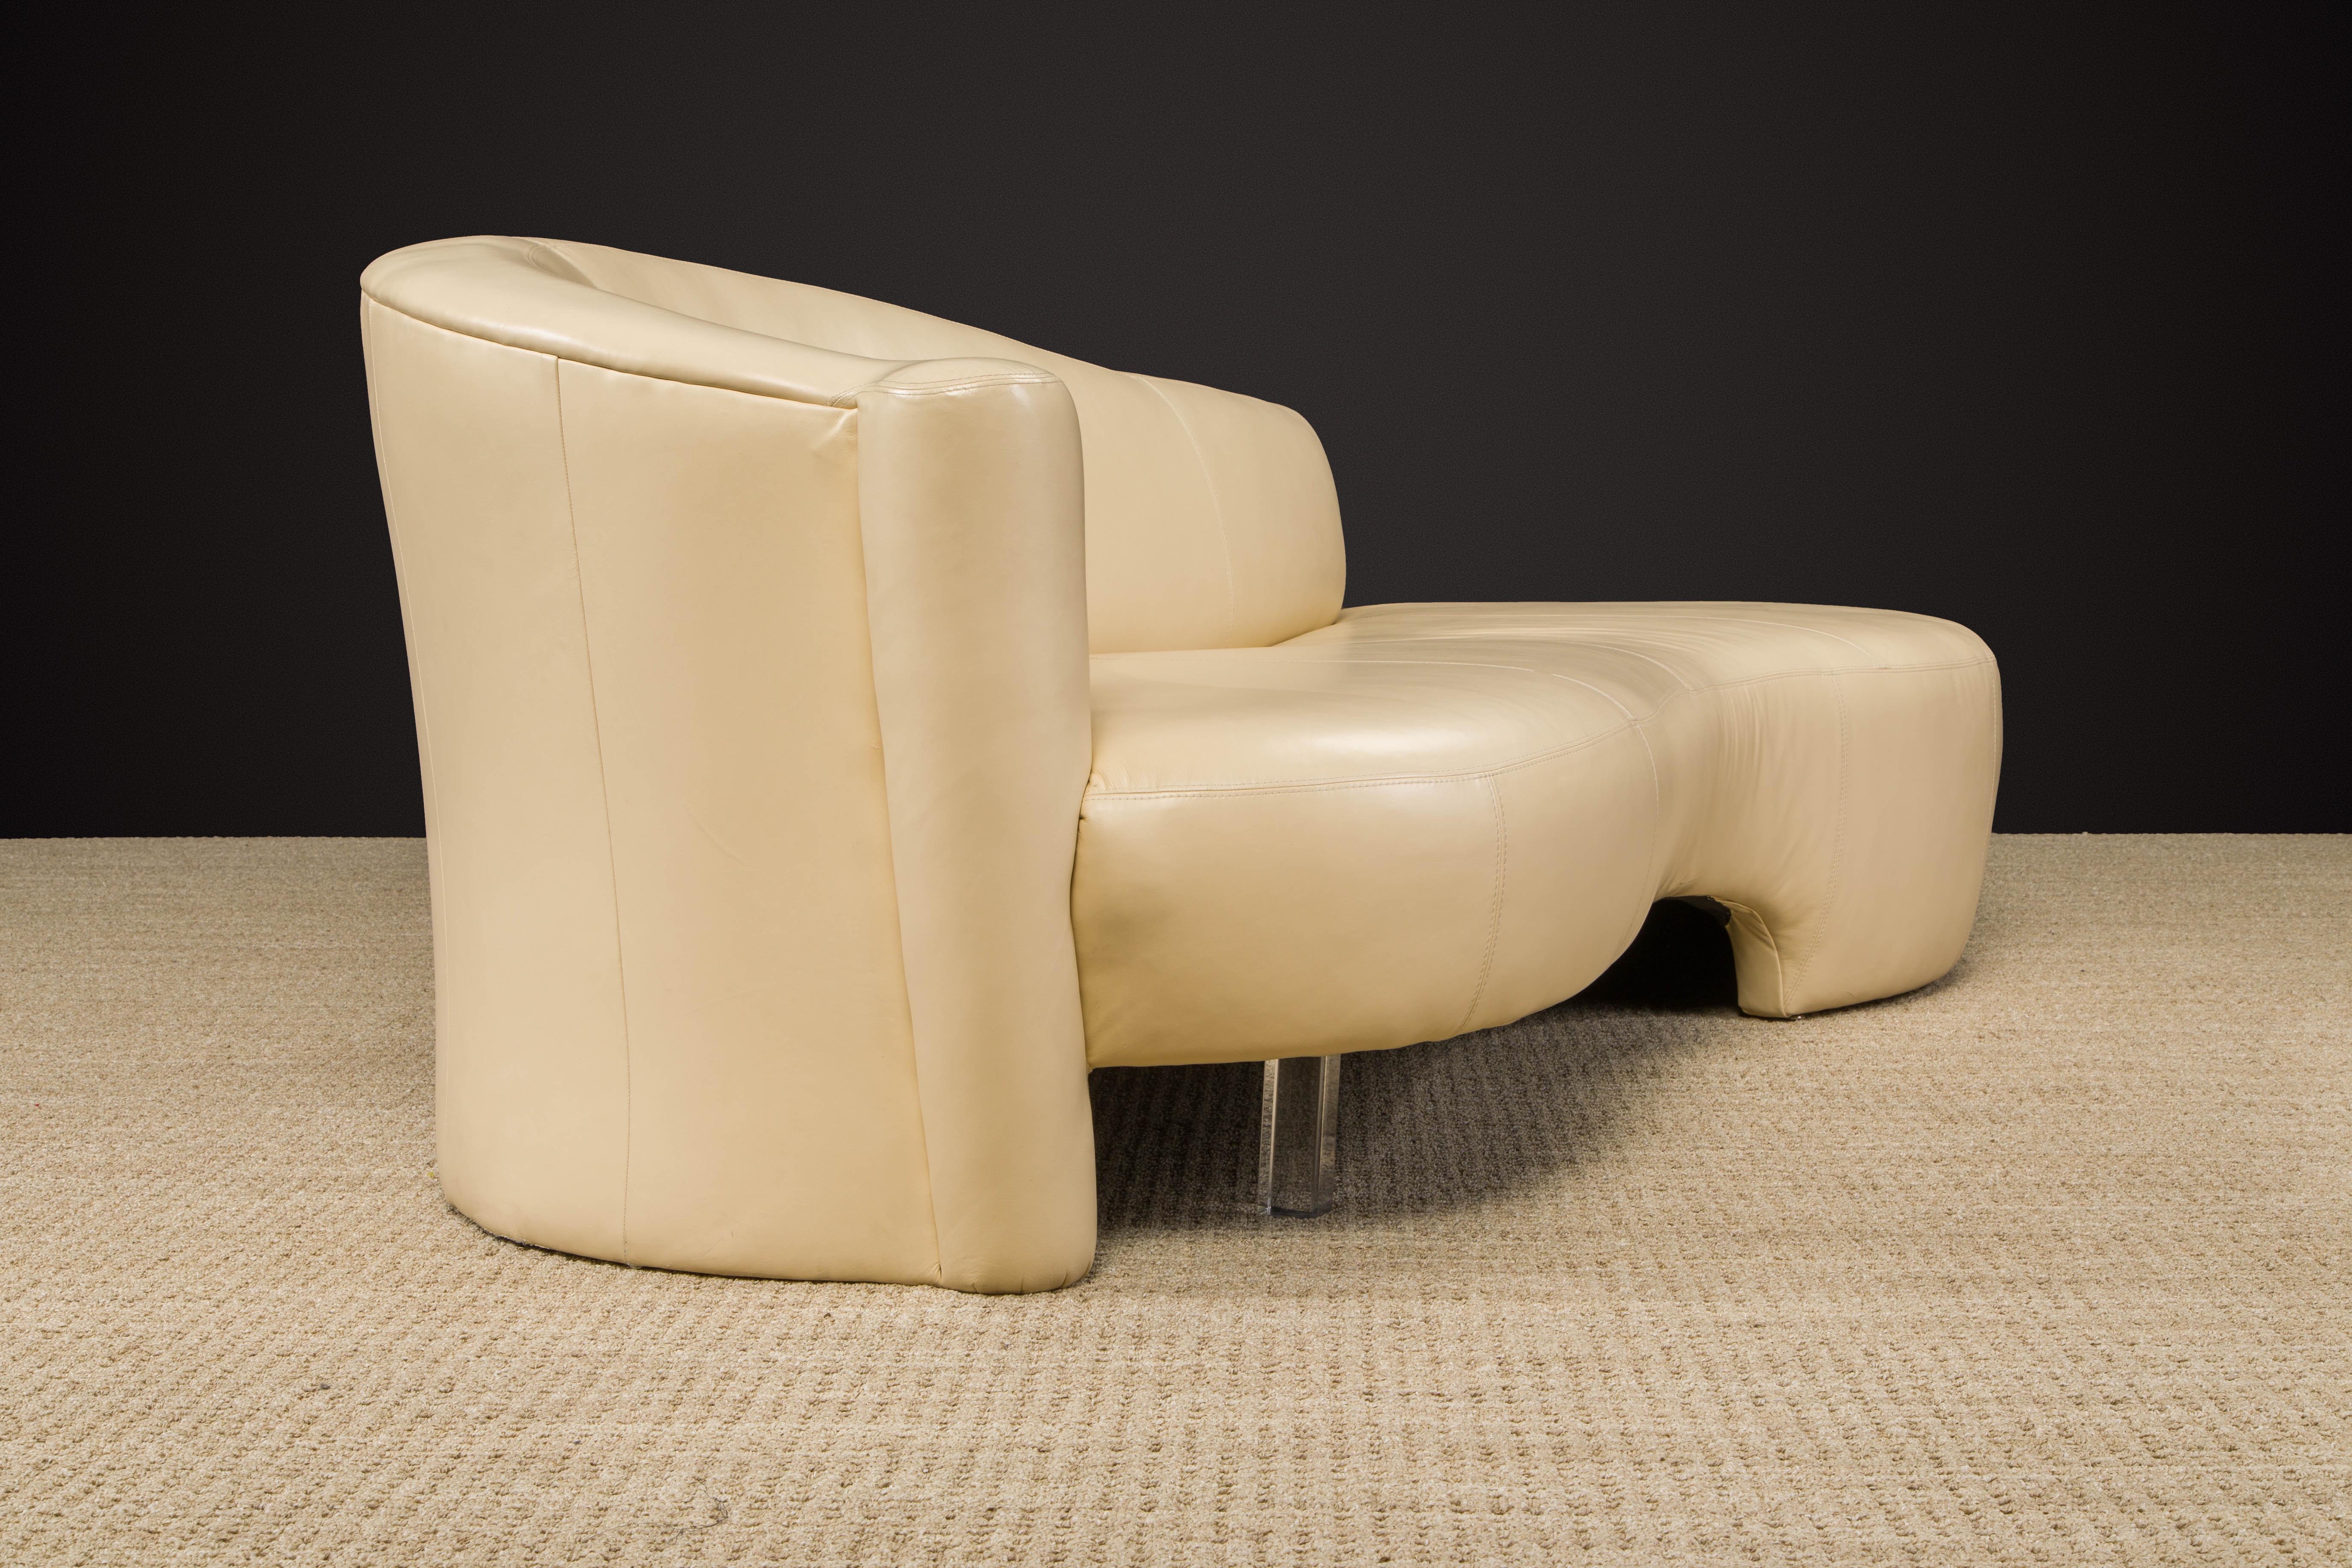 Late 20th Century Tan Leather Cloud Style Sofa with Lucite Leg by Weiman, c 1980s, Signed For Sale